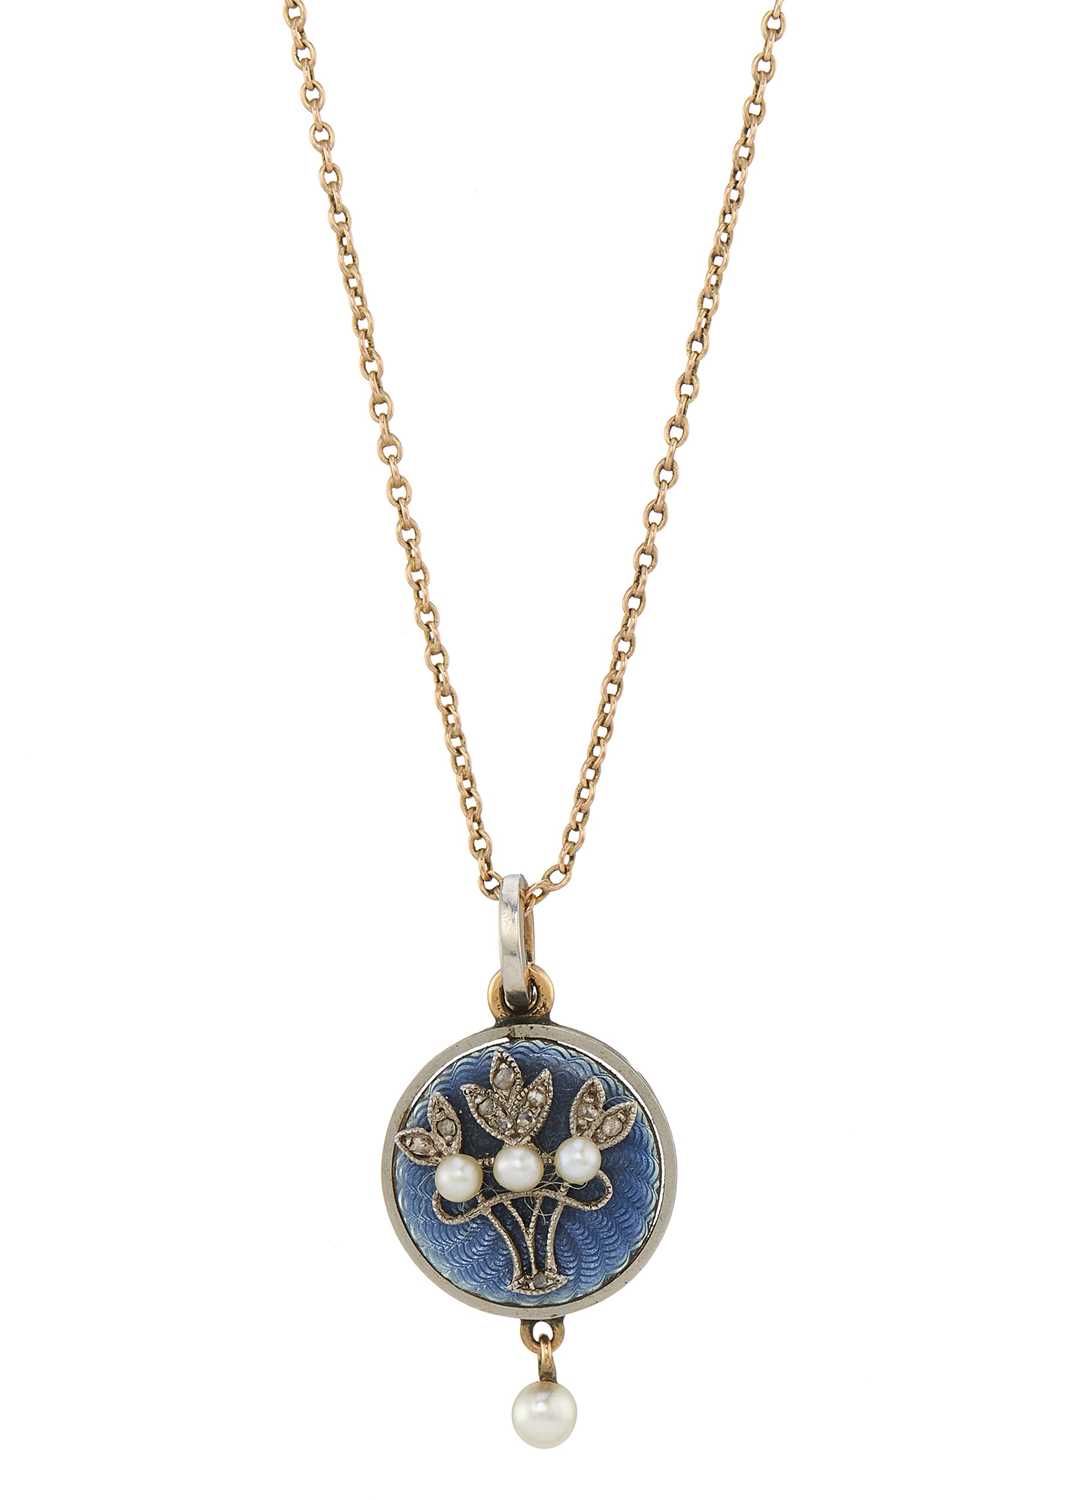 Lot 3 - A Belle Epoque enamel, pearl and diamond necklace